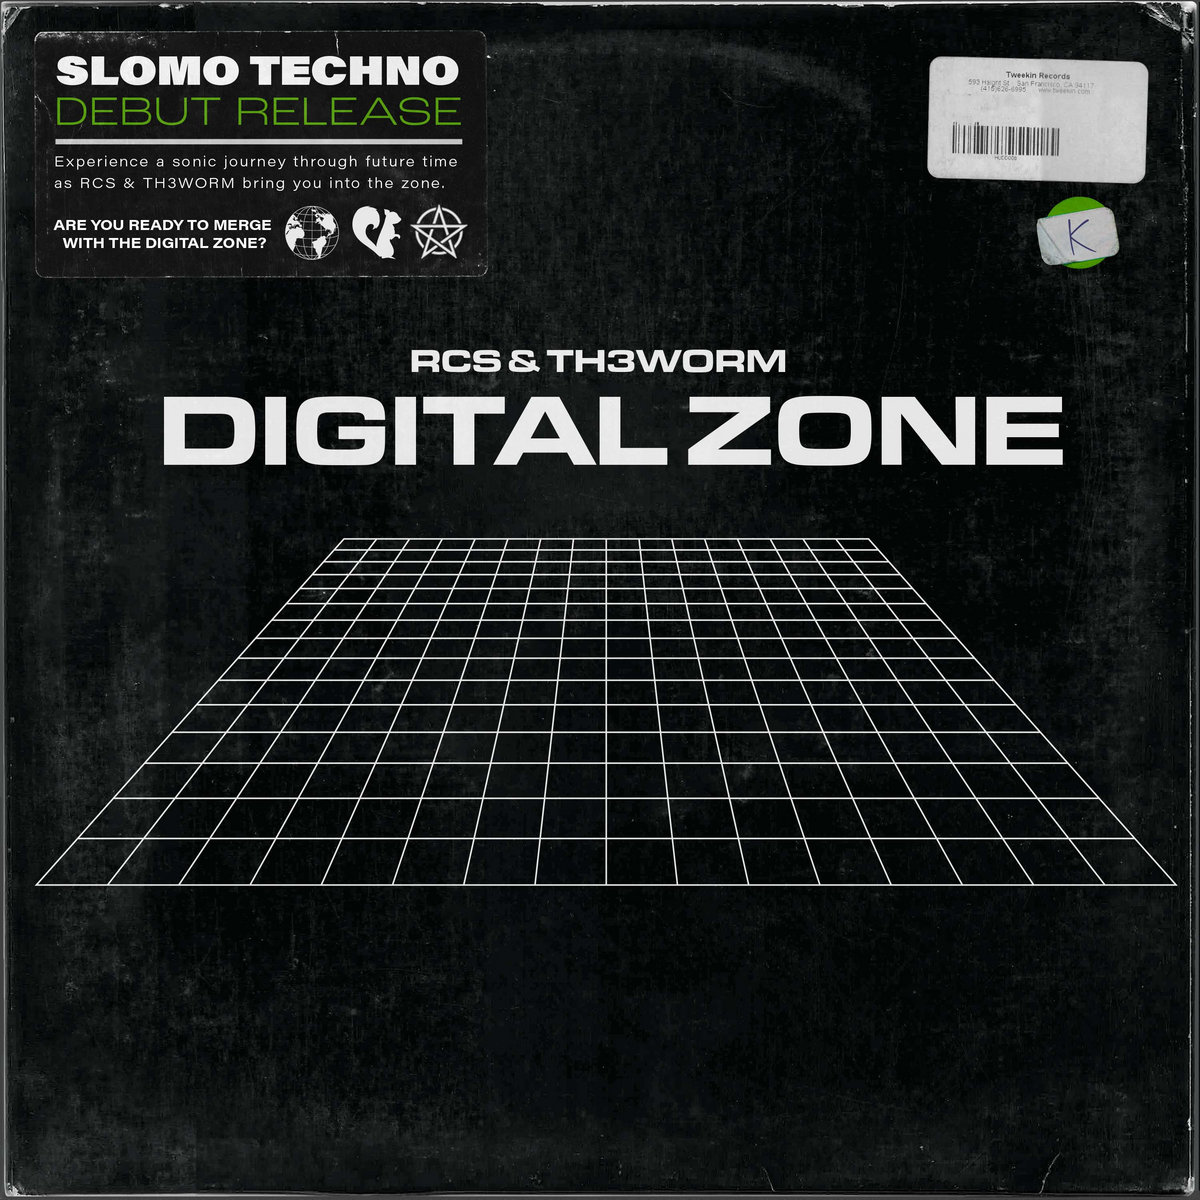 Record Sleeve with picture of a digital 3D Grid in perspective